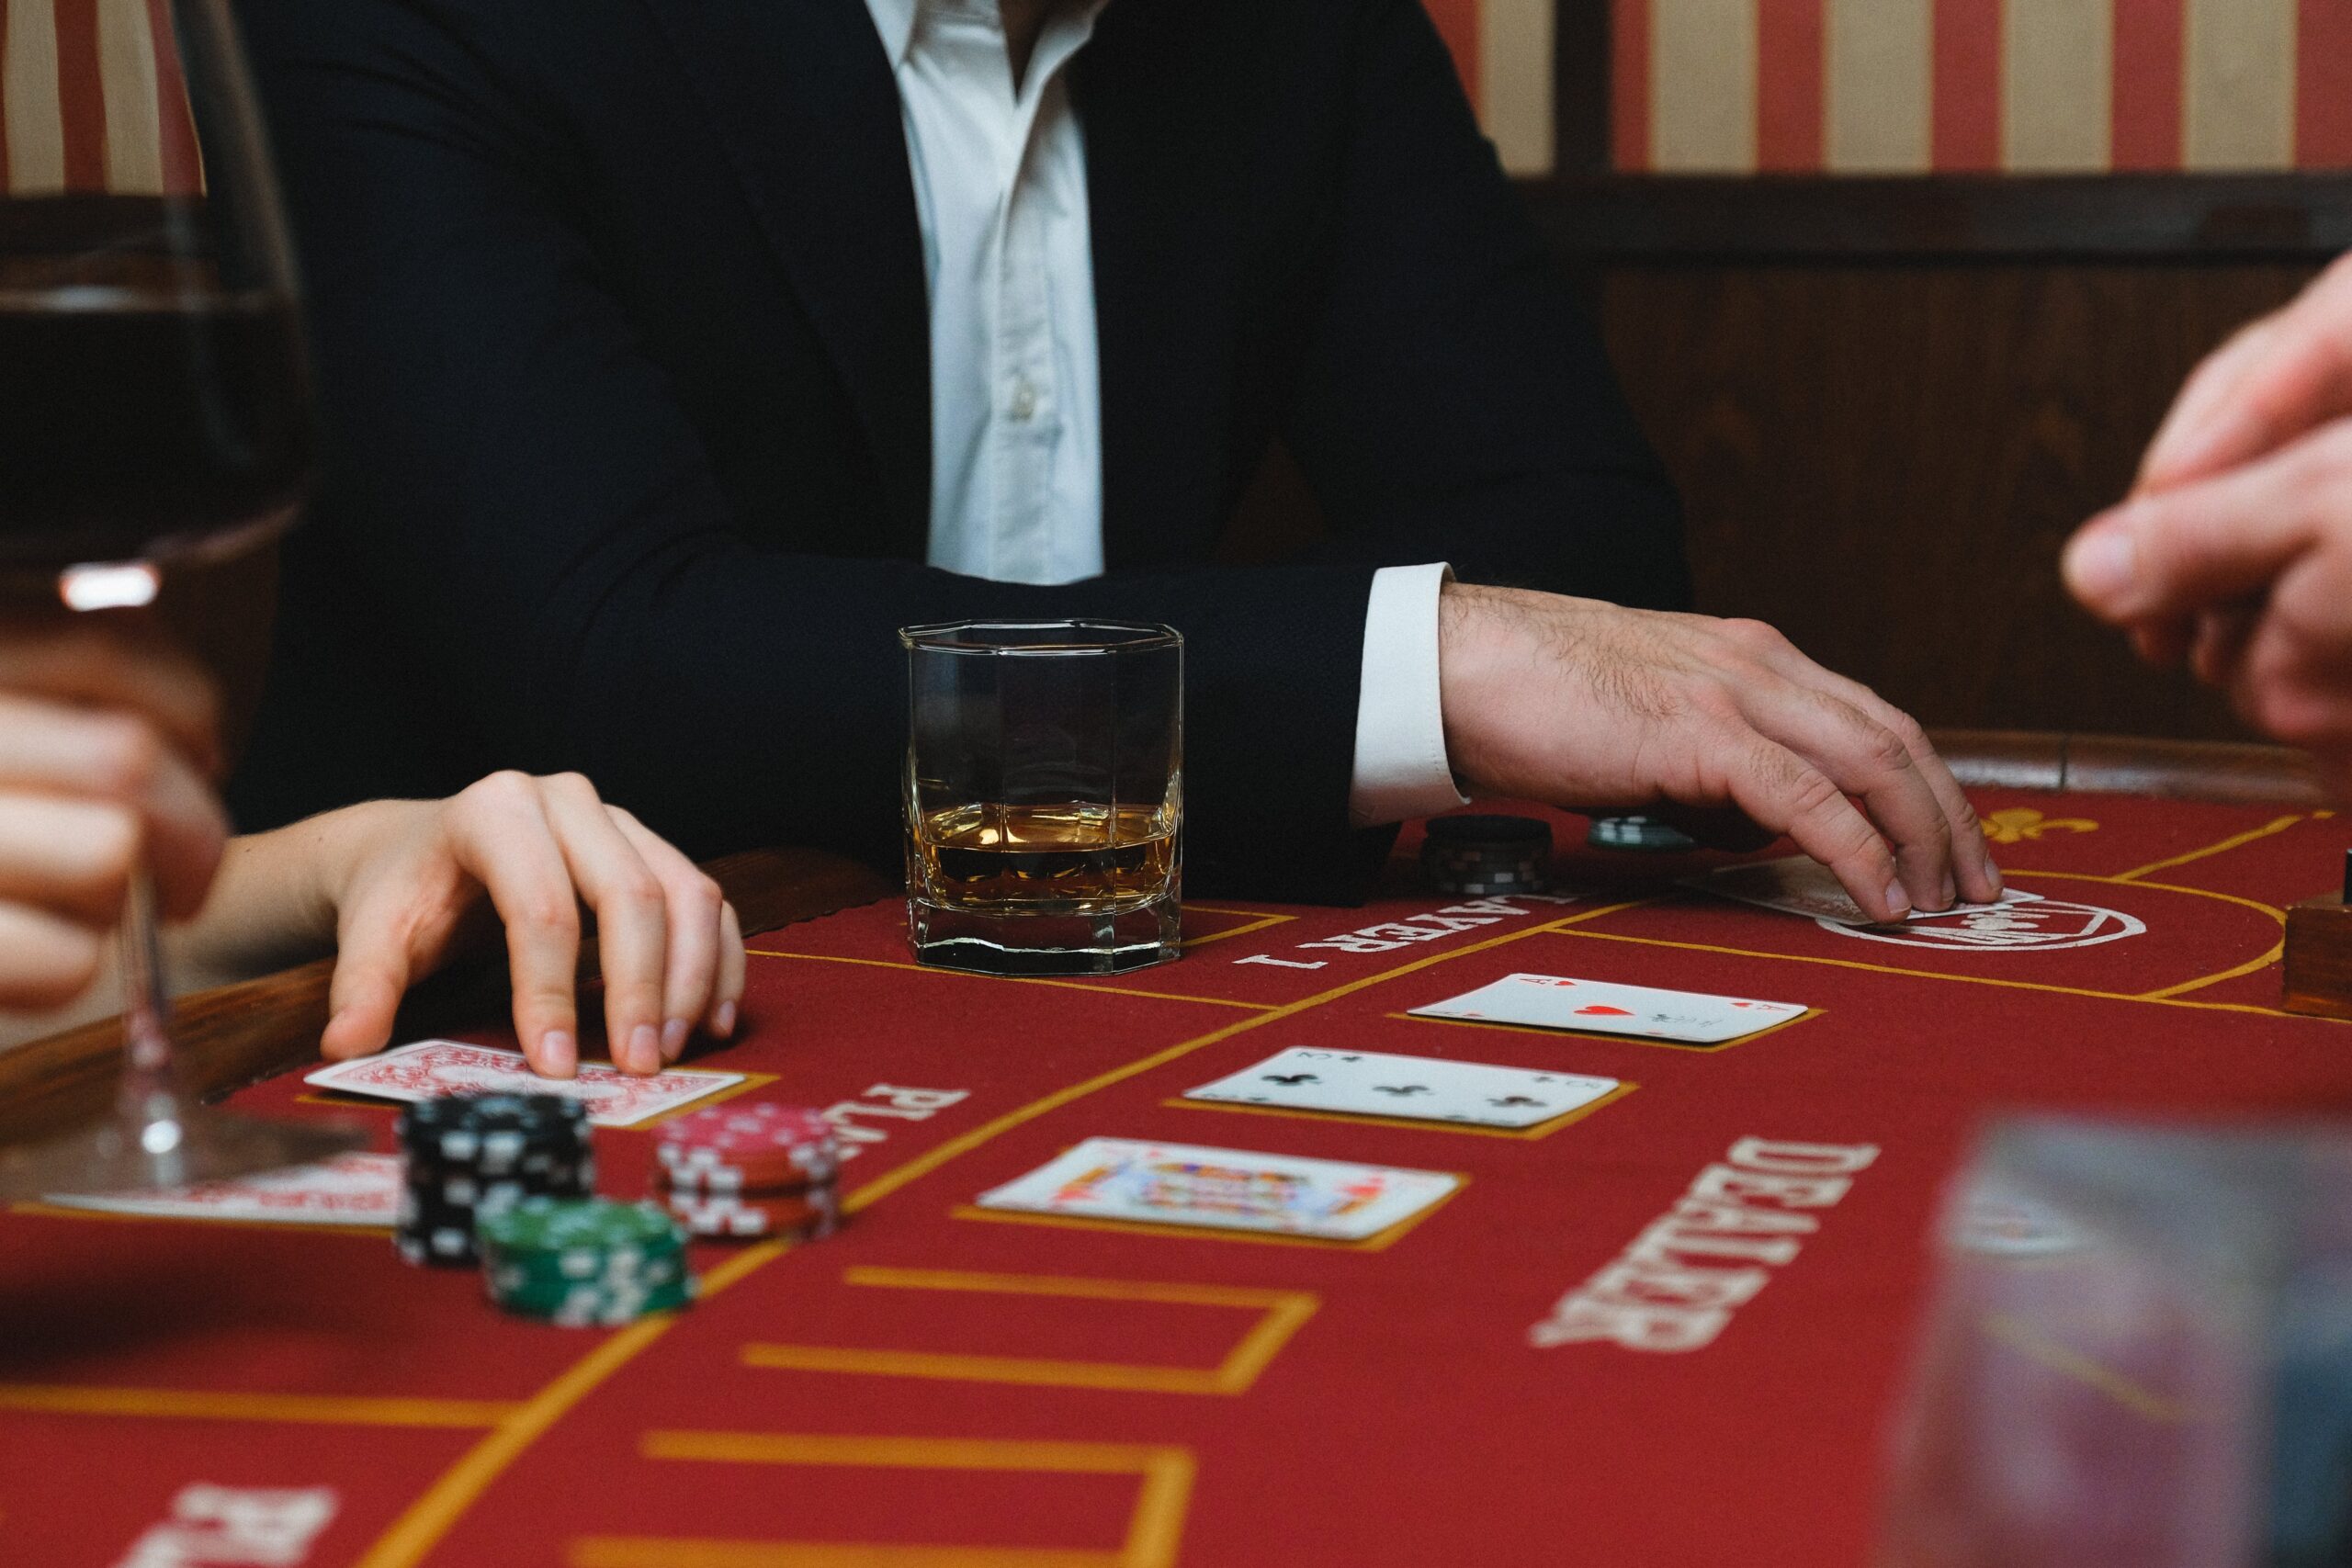 Blackjack is often considered a game of chance